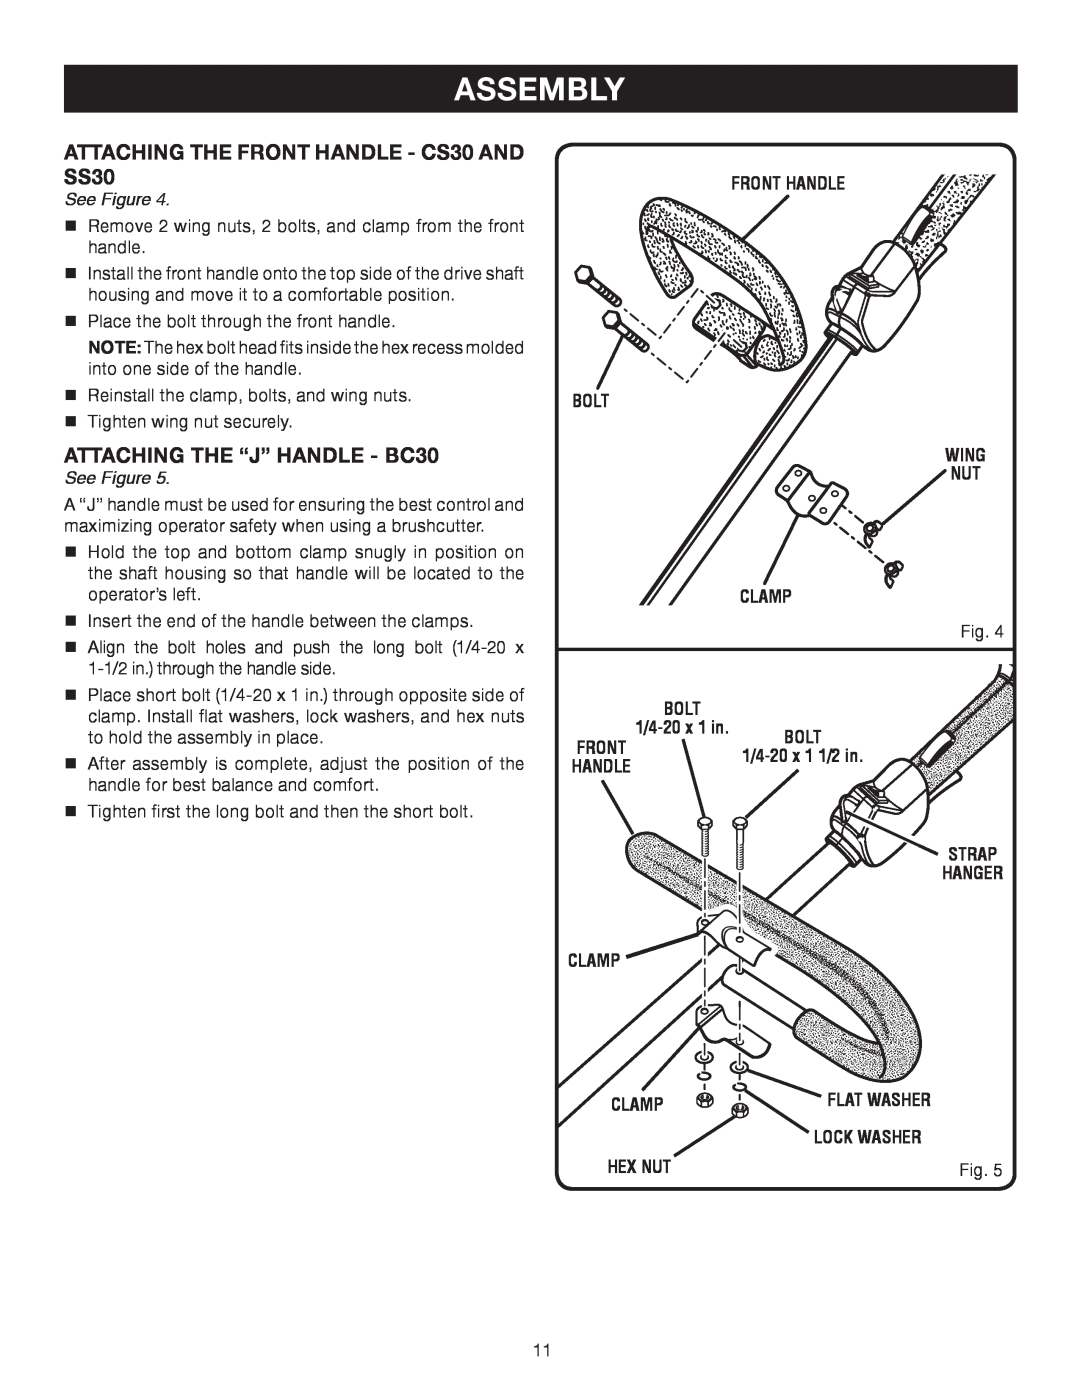 Ryobi SS30 RY30140 ATTACHING THE FRONT HANDLE - CS30 AND SS30, ATTACHING THE “J” HANDLE - BC30, Assembly, See Figure, Wing 